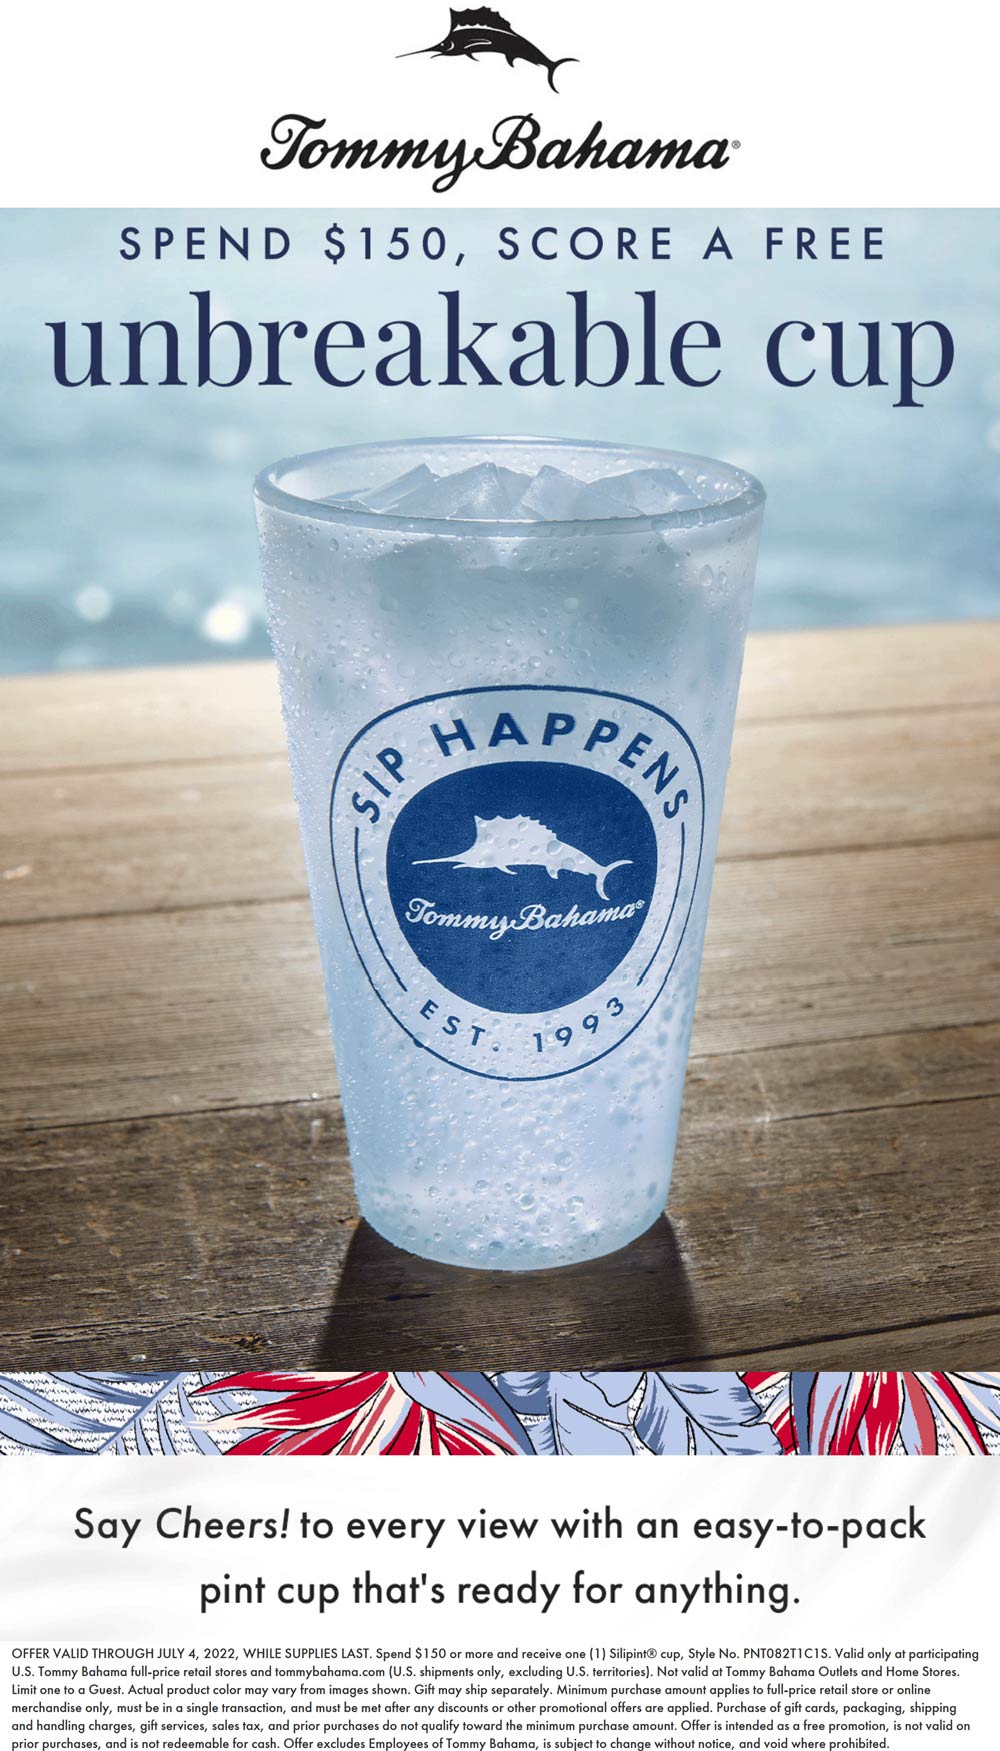 Tommy Bahama stores Coupon  Free unbreakable logo cup on $150 at Tommy Bahama, ditto online #tommybahama 